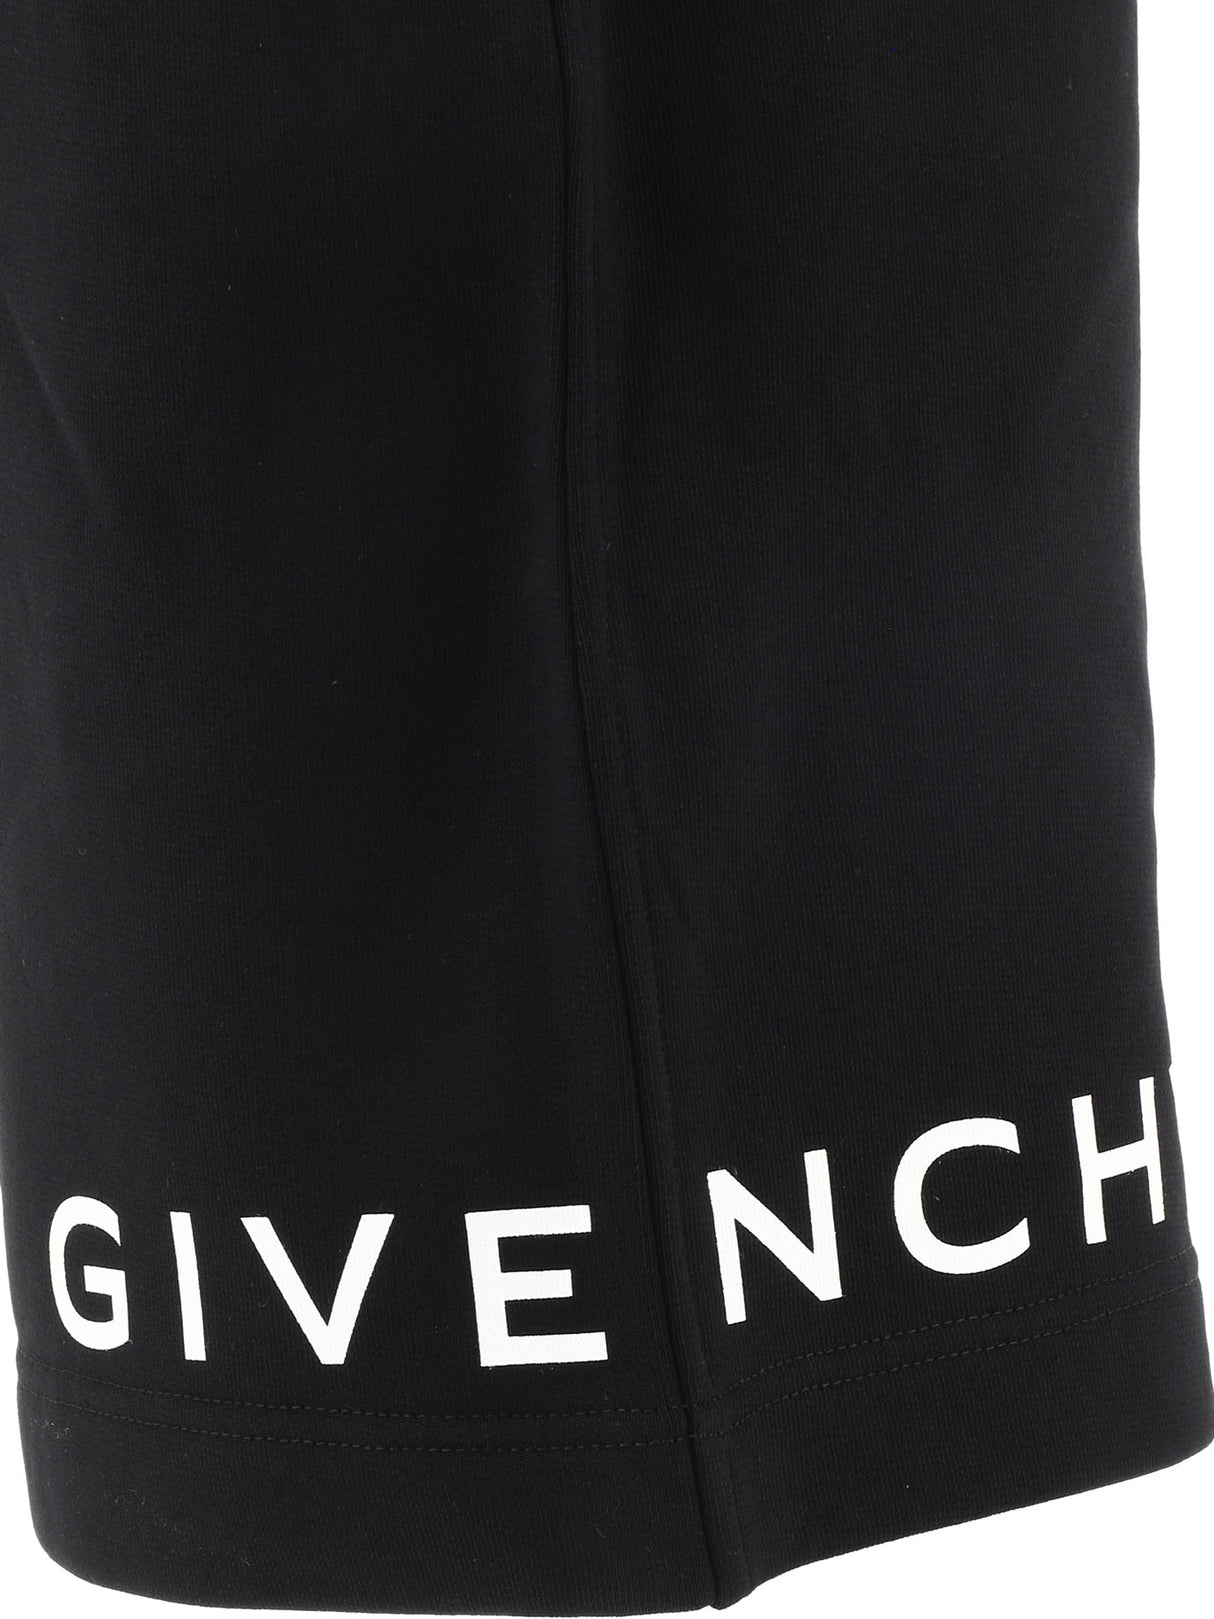 GIVENCHY Men's Black 'Archetype' Shorts for FW24 Collection